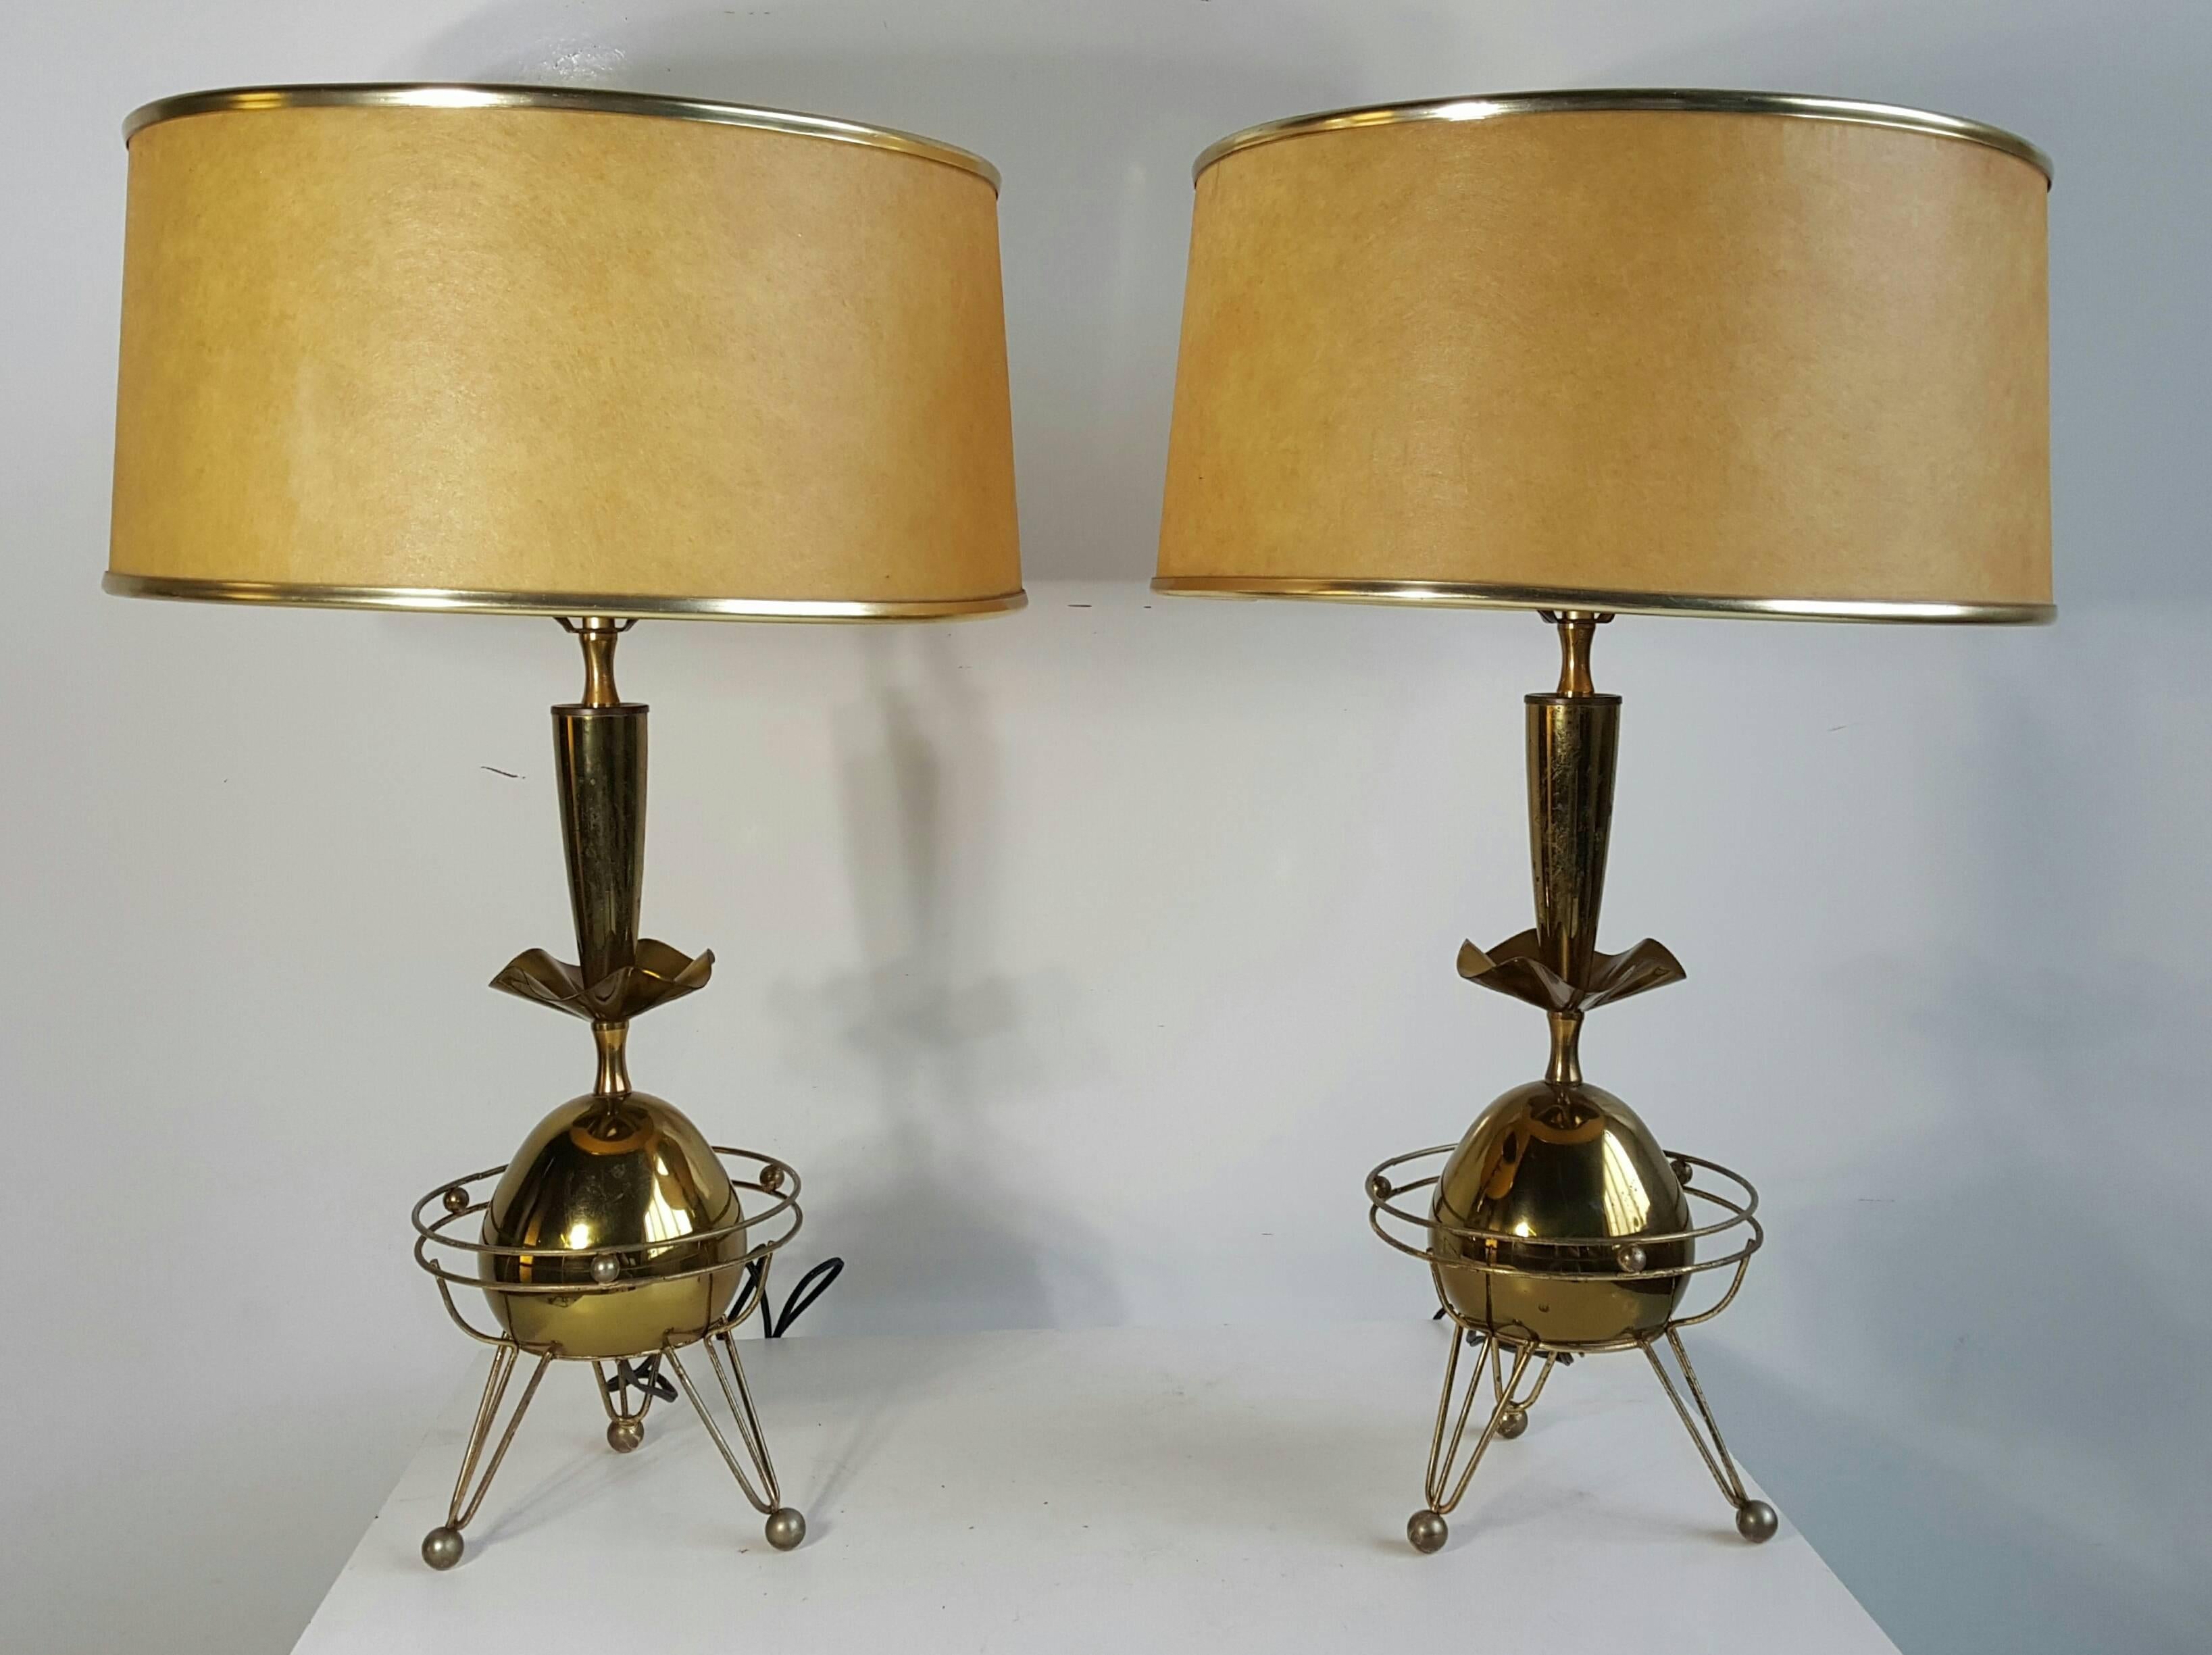 Classic pair of Mid-Century Modern brass atomic lamps,,Retain original parchment lamp shades measuring 15